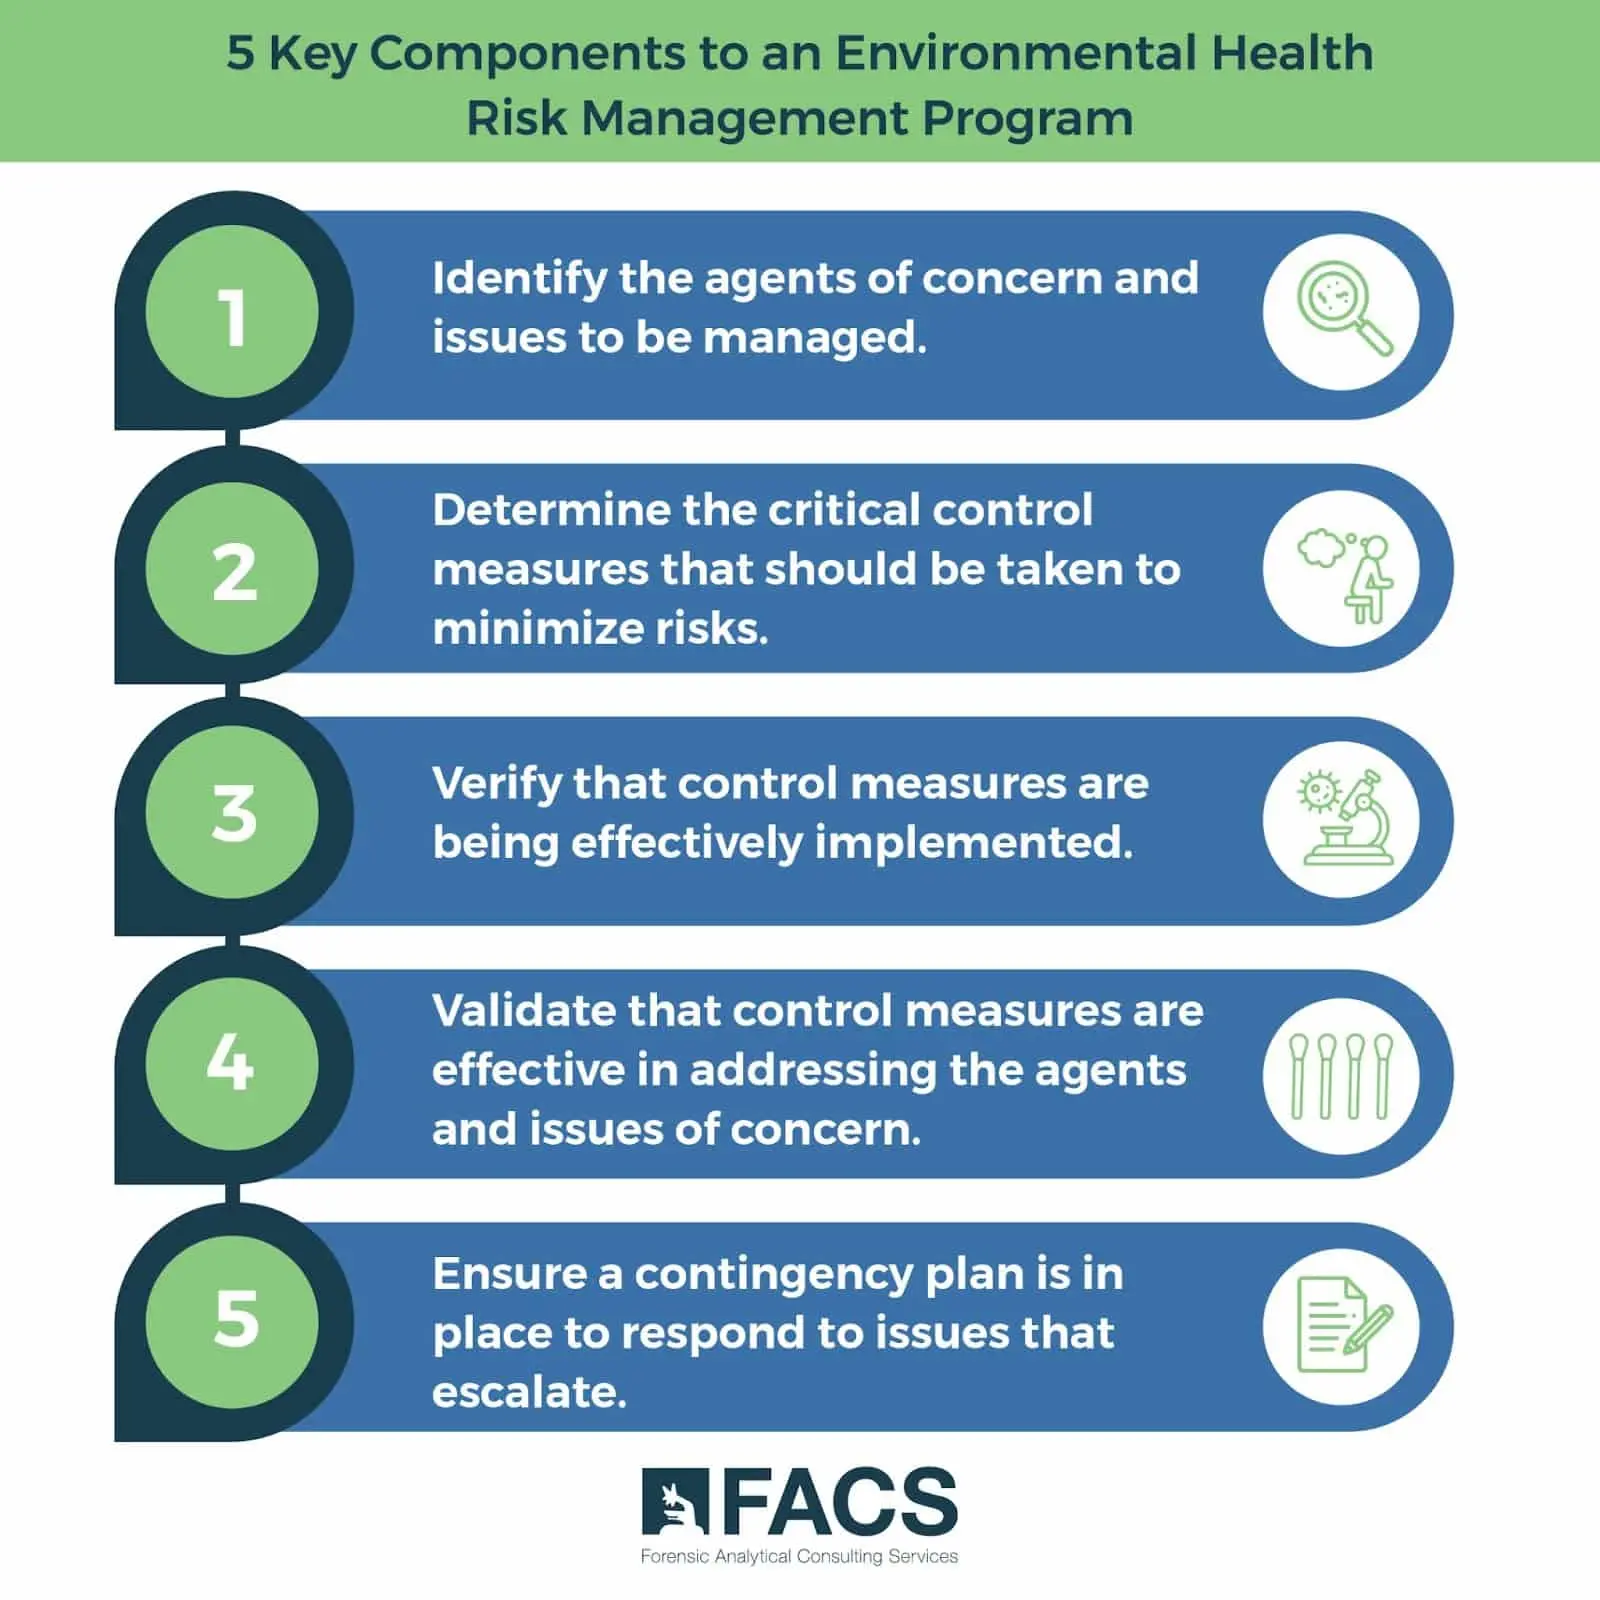 5 Key Components to an Environmental Health Risk MAnagement Program. Graphic.